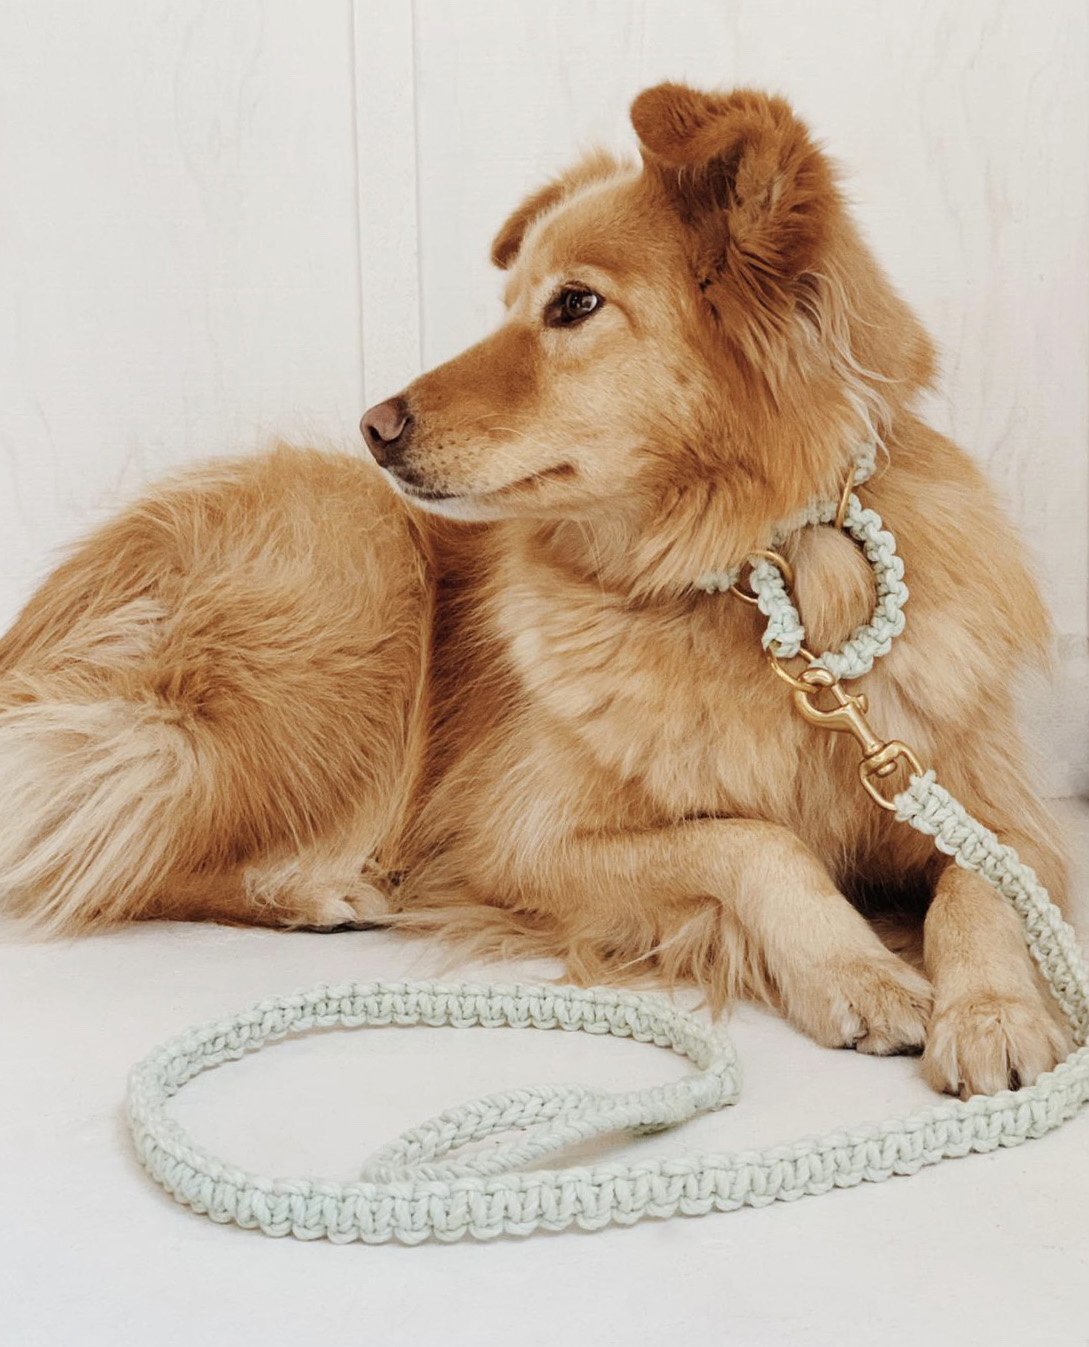 7 Sustainable Dog Collars And Leashes For Your Next W-A-L-K